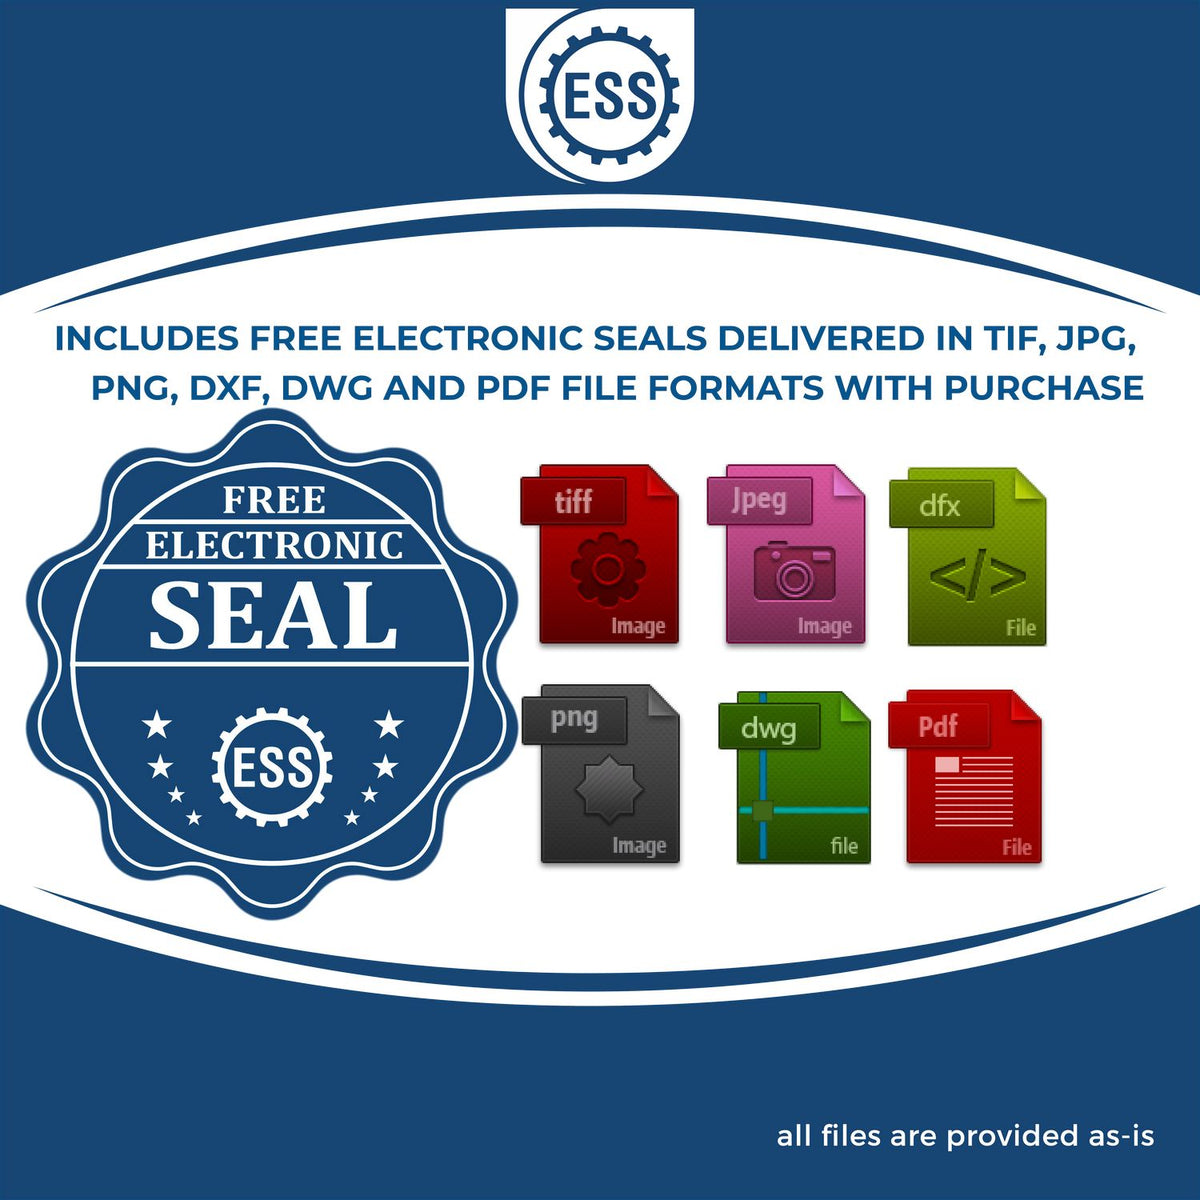 An infographic for the free electronic seal for the Gift Pennsylvania Land Surveyor Seal illustrating the different file type icons such as DXF, DWG, TIF, JPG and PNG.